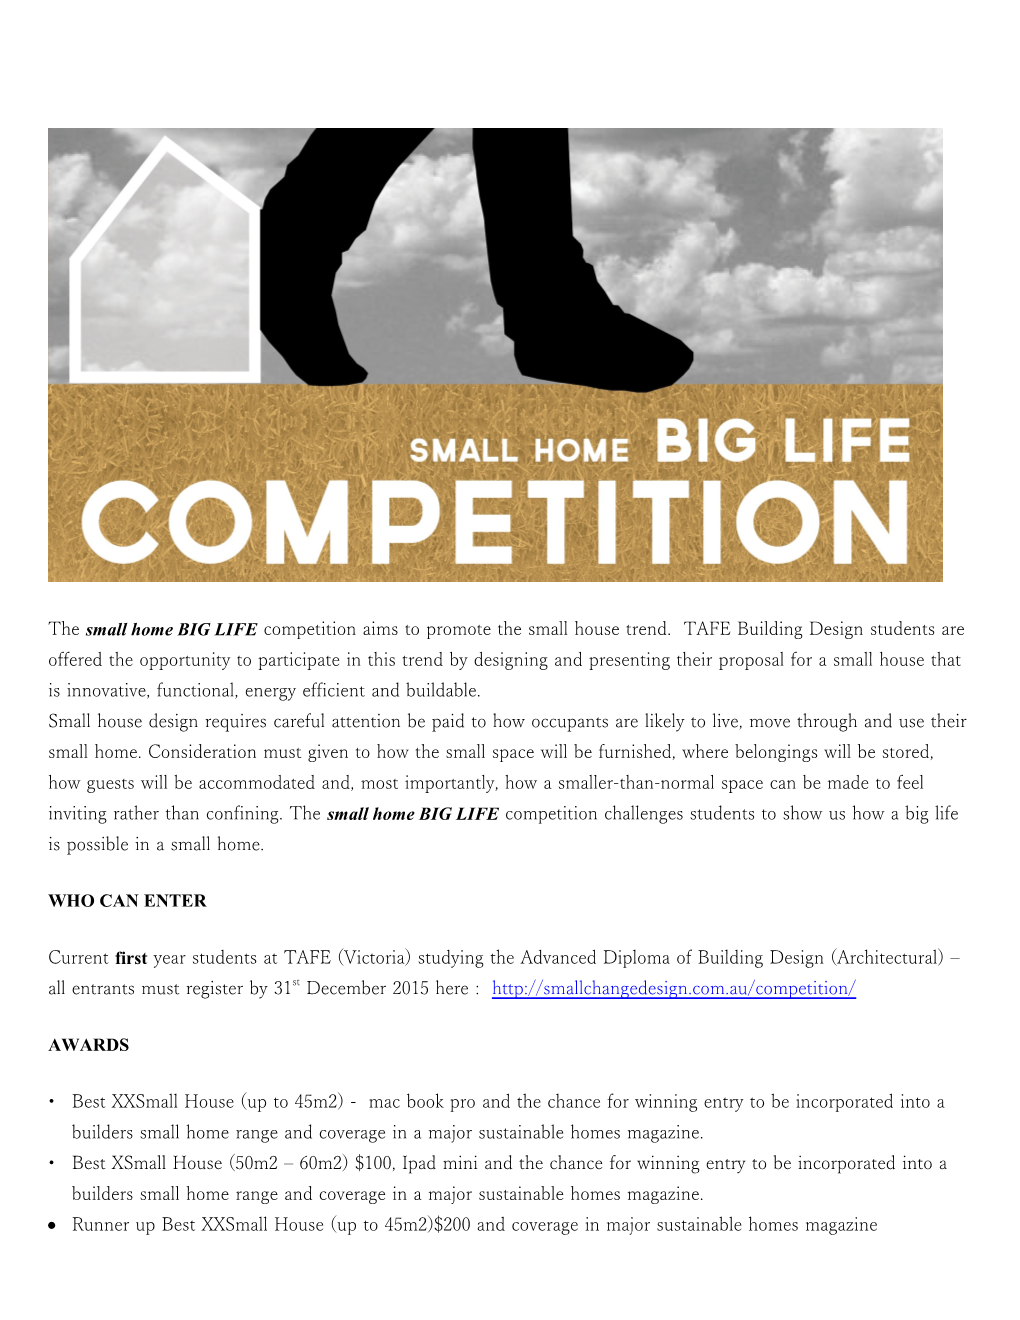 The Small Home BIG LIFE Competition Aims to Promote the Small House Trend. TAFE Building